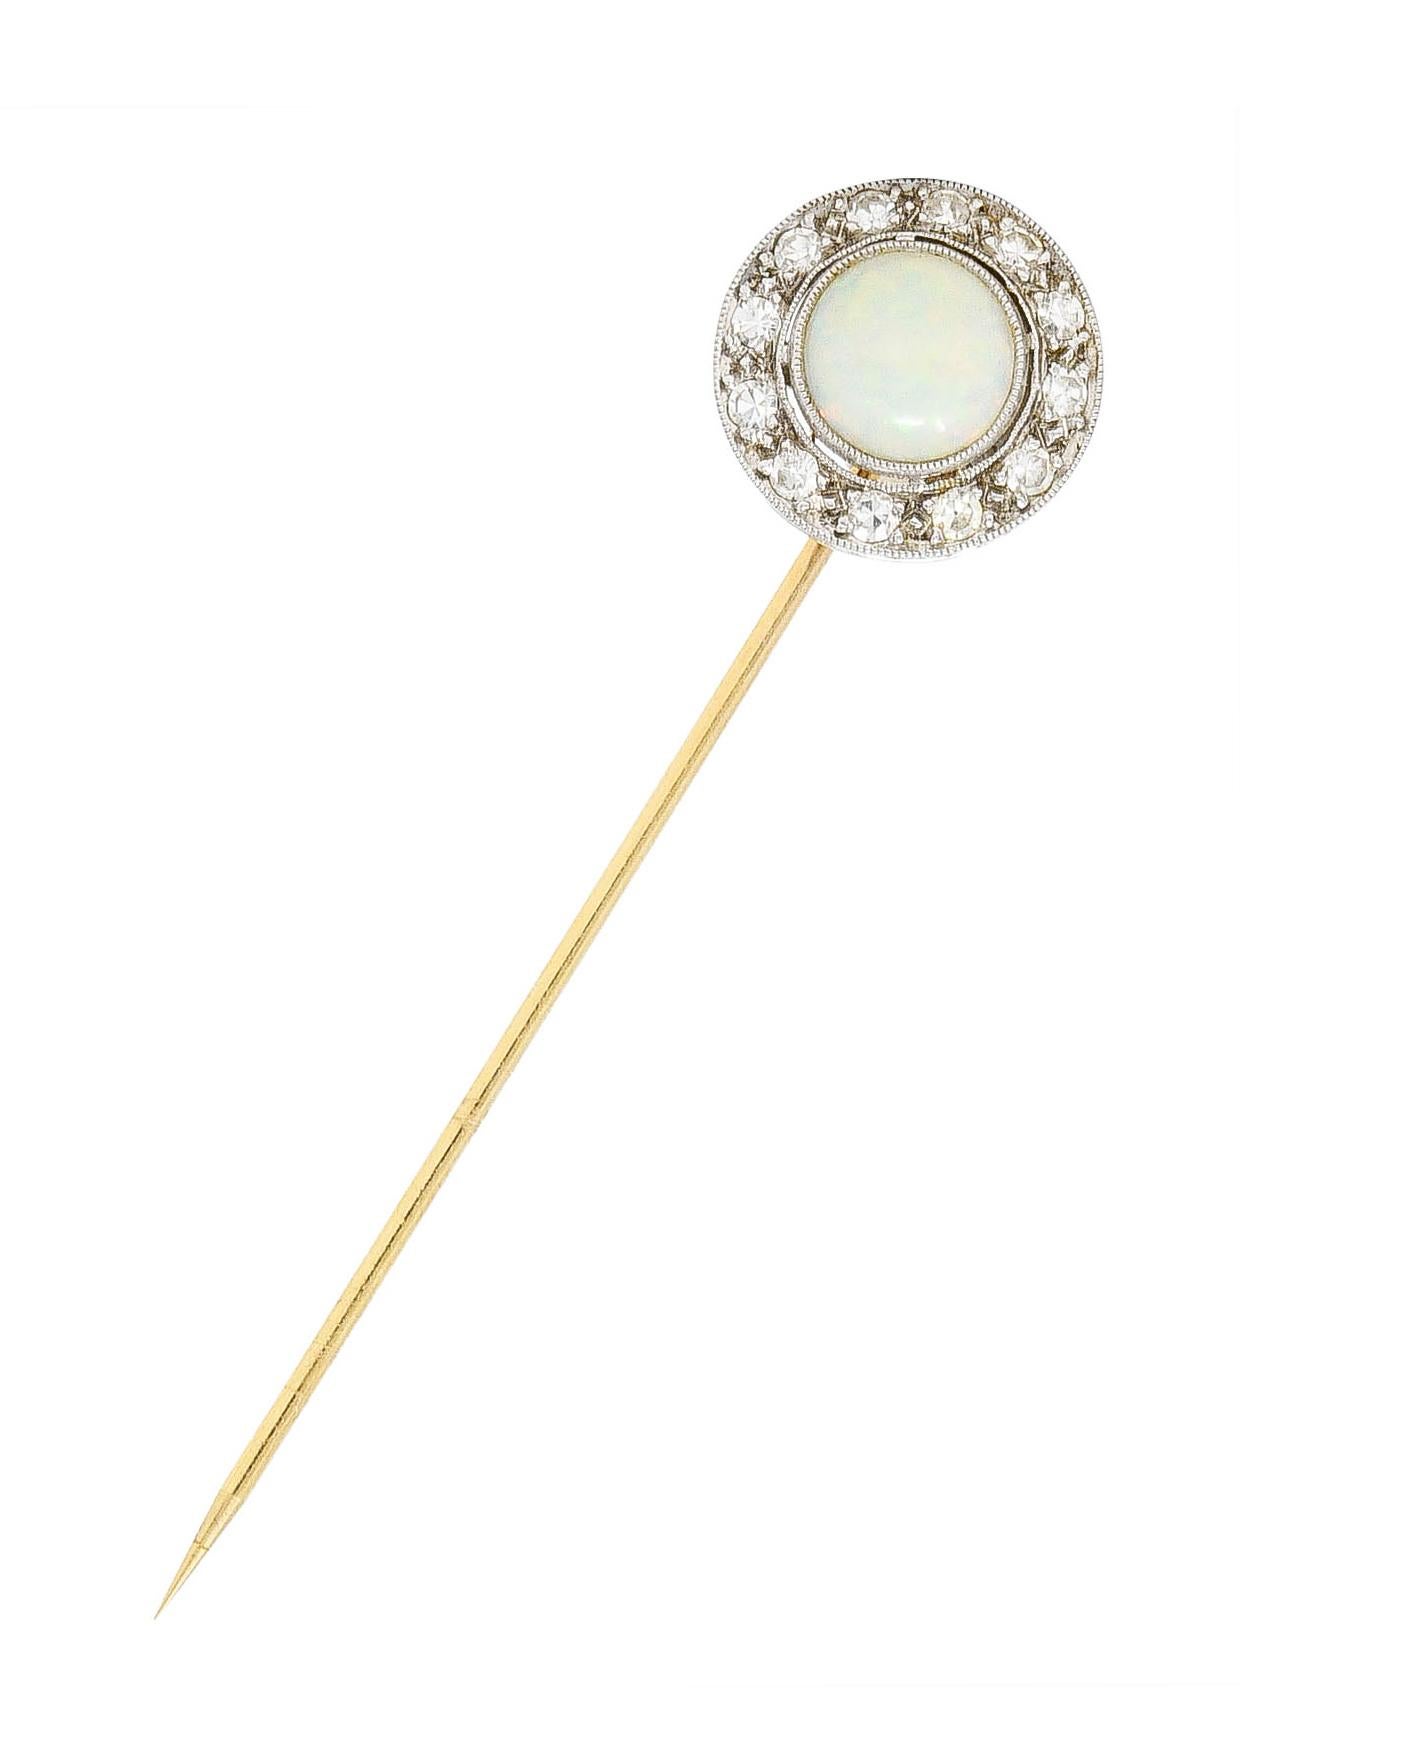 Centering a 6.0 mm round opal cabochon bezel set in platinum

Translucent white in body color with spectral play-of-color

With bead set single cut diamond halo surround

Weighing approximately 0.24 carat total - eye clean and bright

Completed by